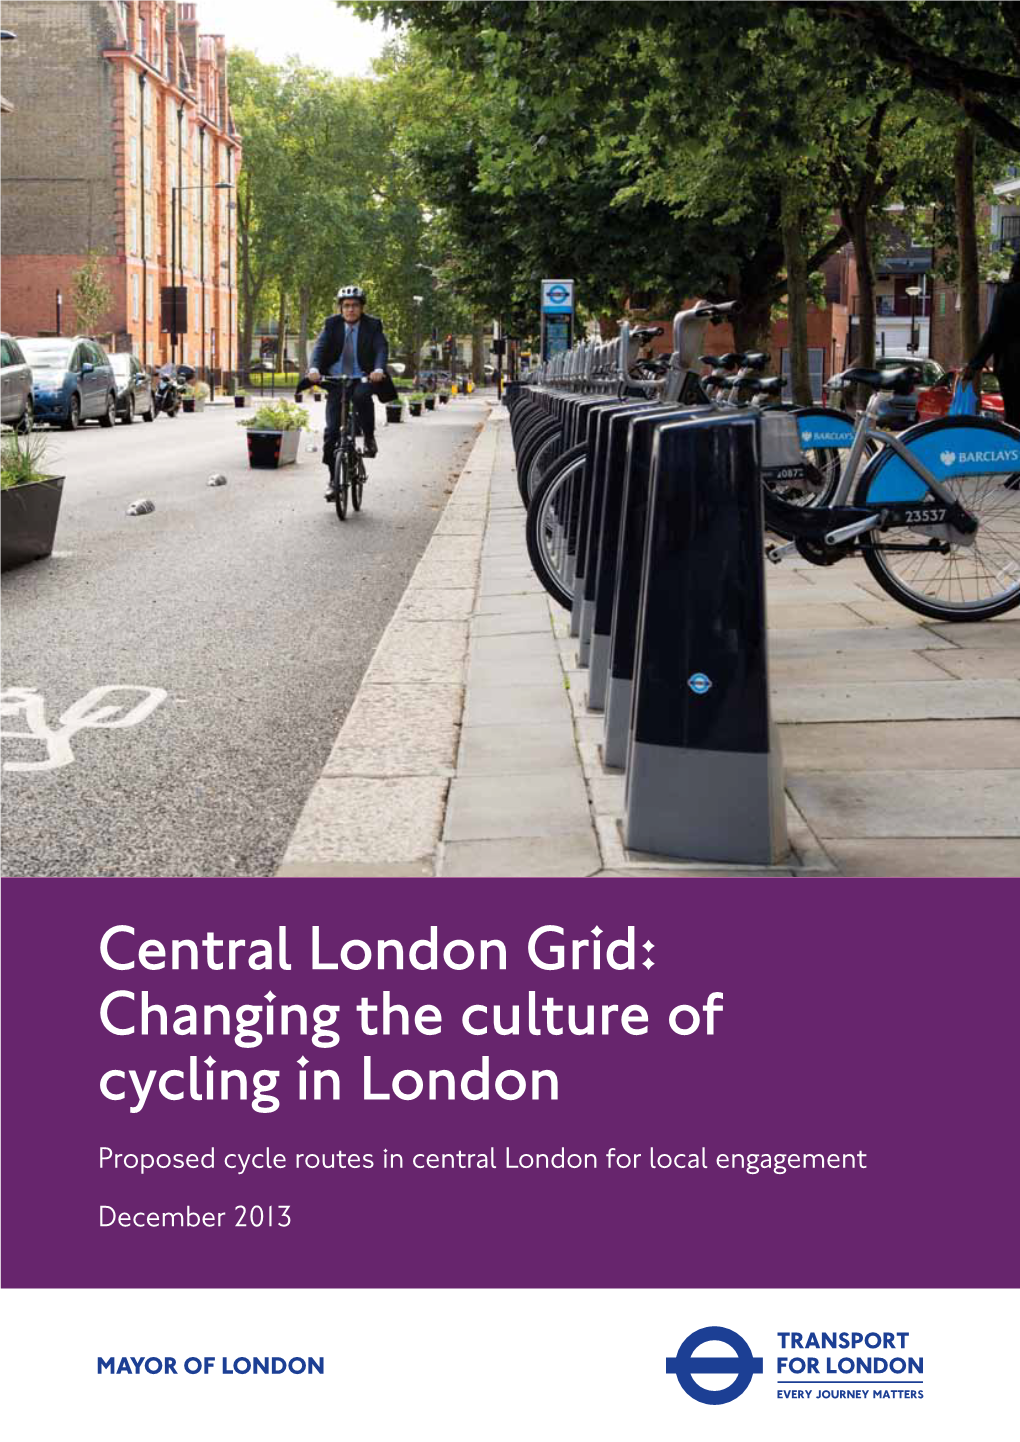 Central London Grid: Changing the Culture of Cycling in London Proposed Cycle Routes in Central London for Local Engagement December 2013